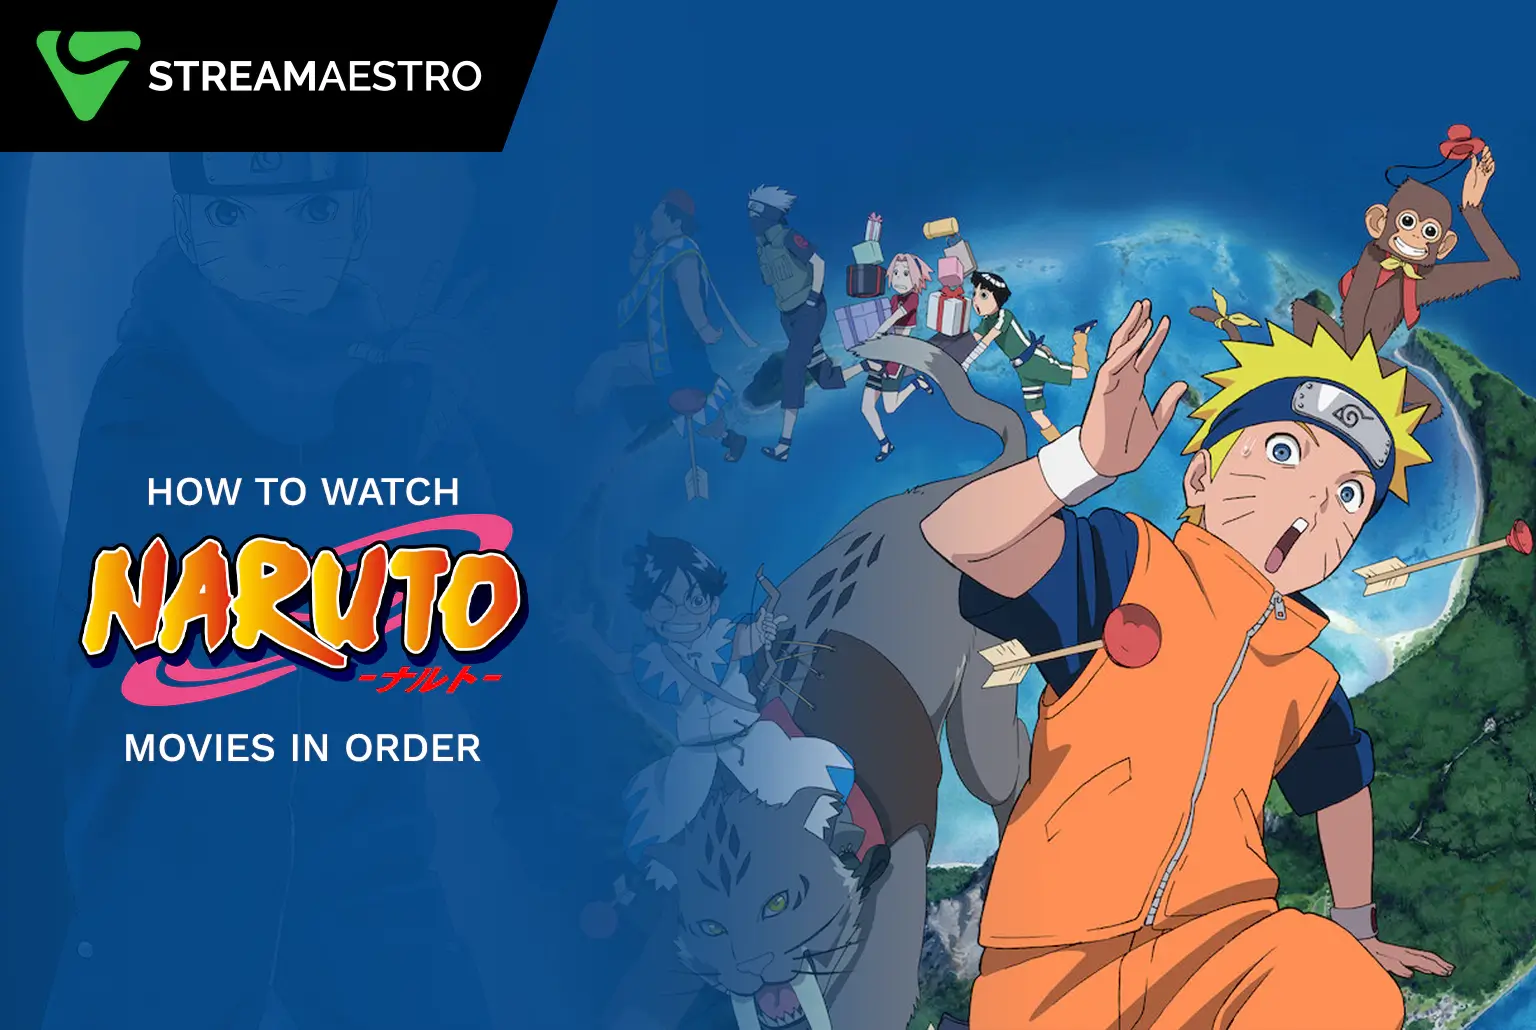 Watch Naruto Movies in Order